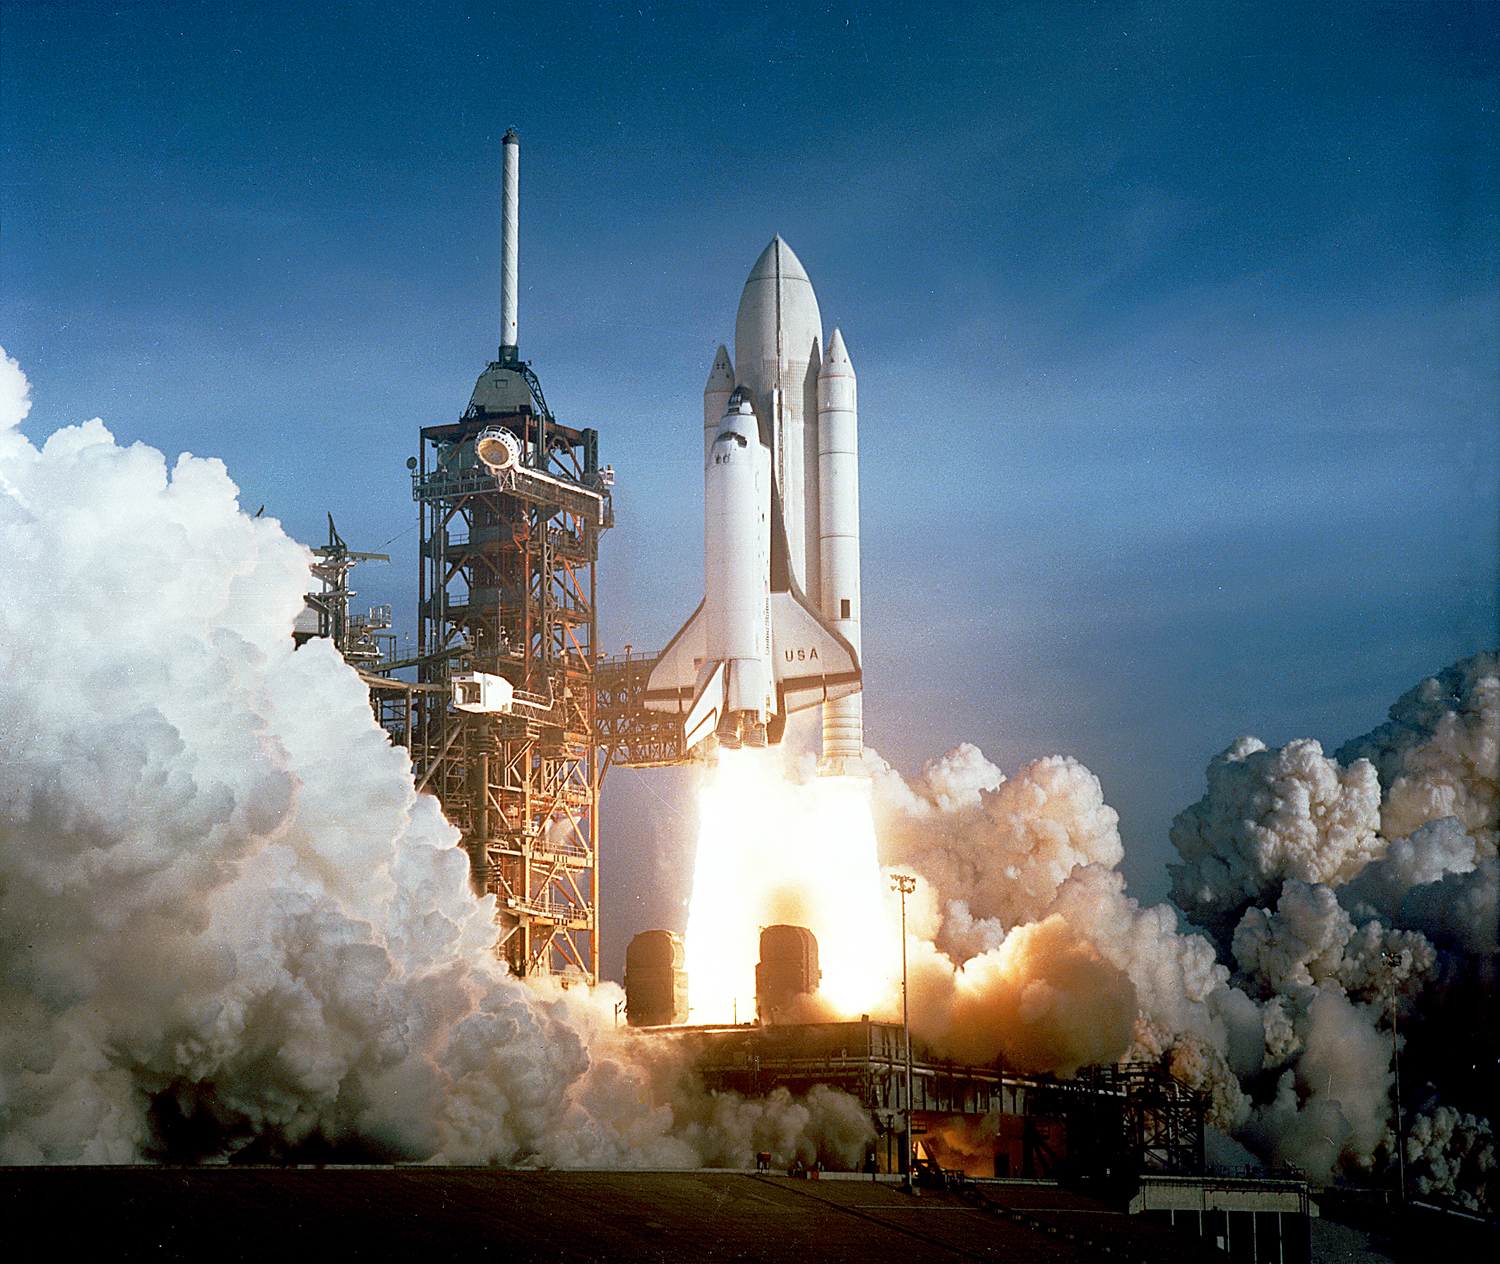 space shuttles, vehicles, space shuttle columbia